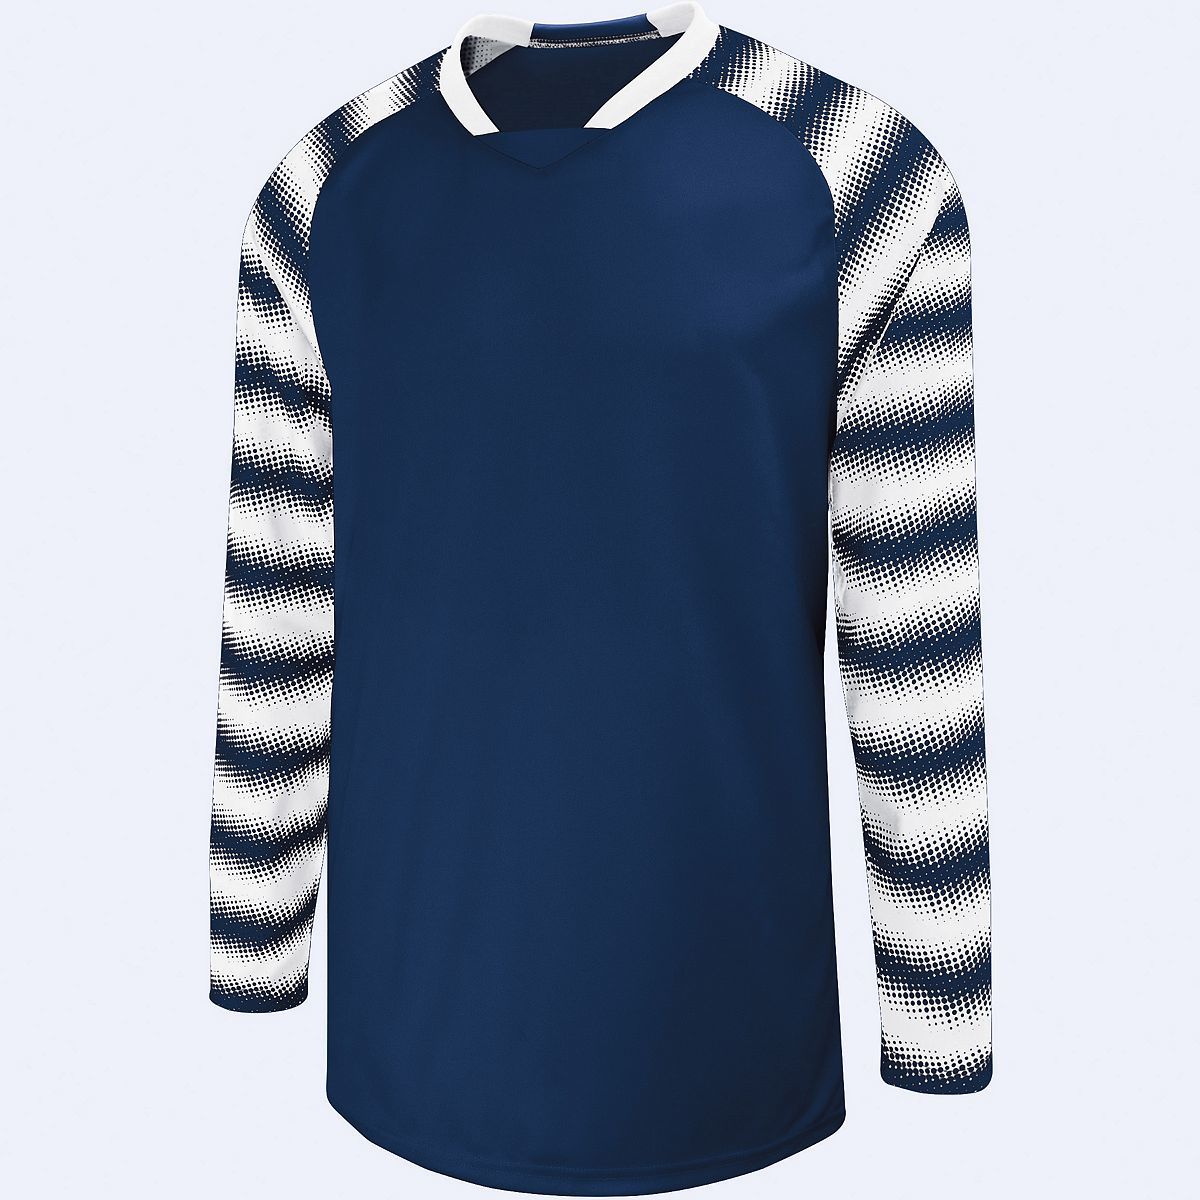 High 5 Youth Prism Goalkeeper Jersey in Navy/White  -Part of the Youth, Youth-Jersey, High5-Products, Soccer, Shirts, All-Sports-1 product lines at KanaleyCreations.com